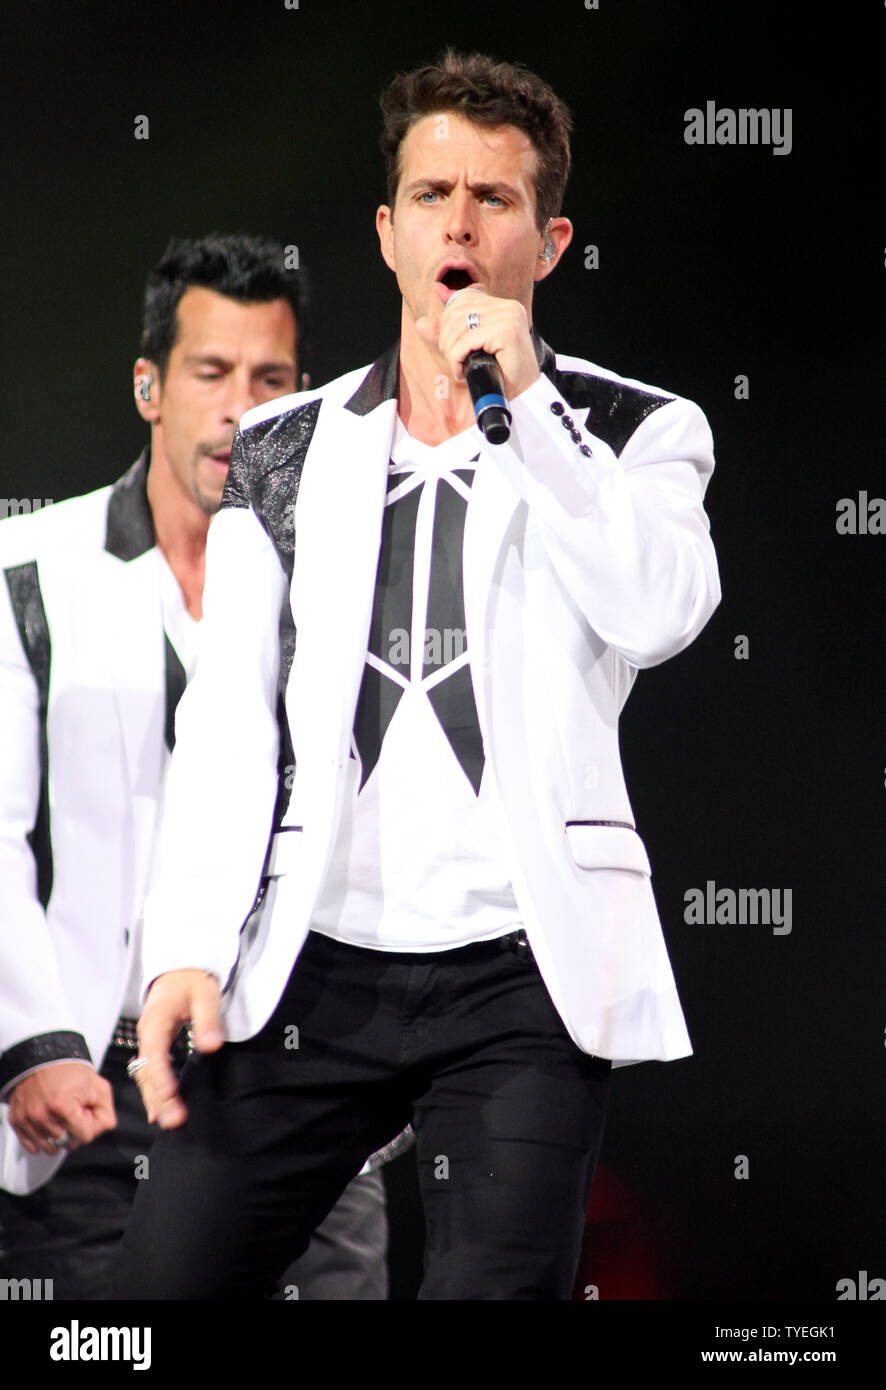 Joey McIntyre with New Kids on the Block performs in concert at the BB & T Center in Sunrise, Florida on June 22, 2013.  UPI/Michael Bush Stock Photo